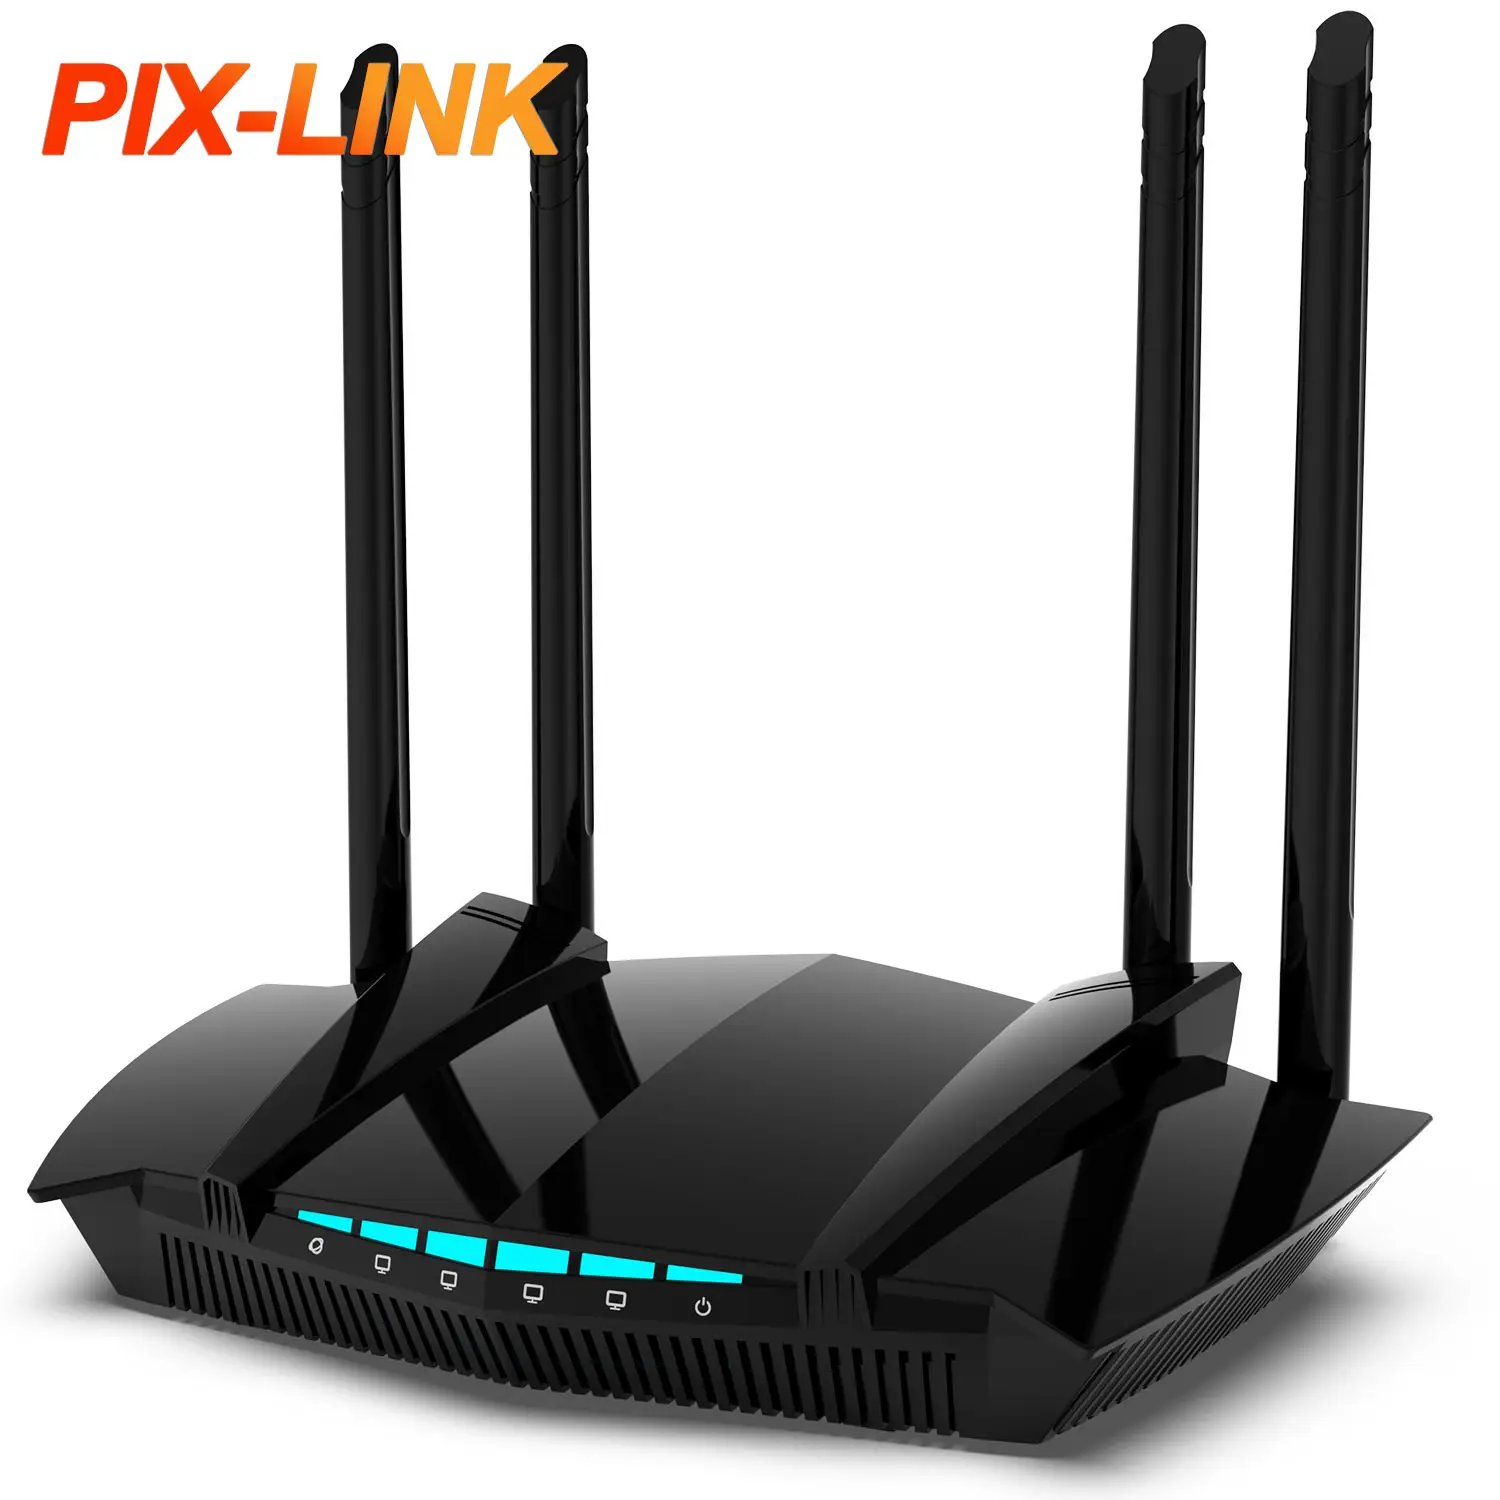 AC1750 Smart WiFi Router (Archer A7) -Dual Band Gigabit Wireless Internet Router for Home